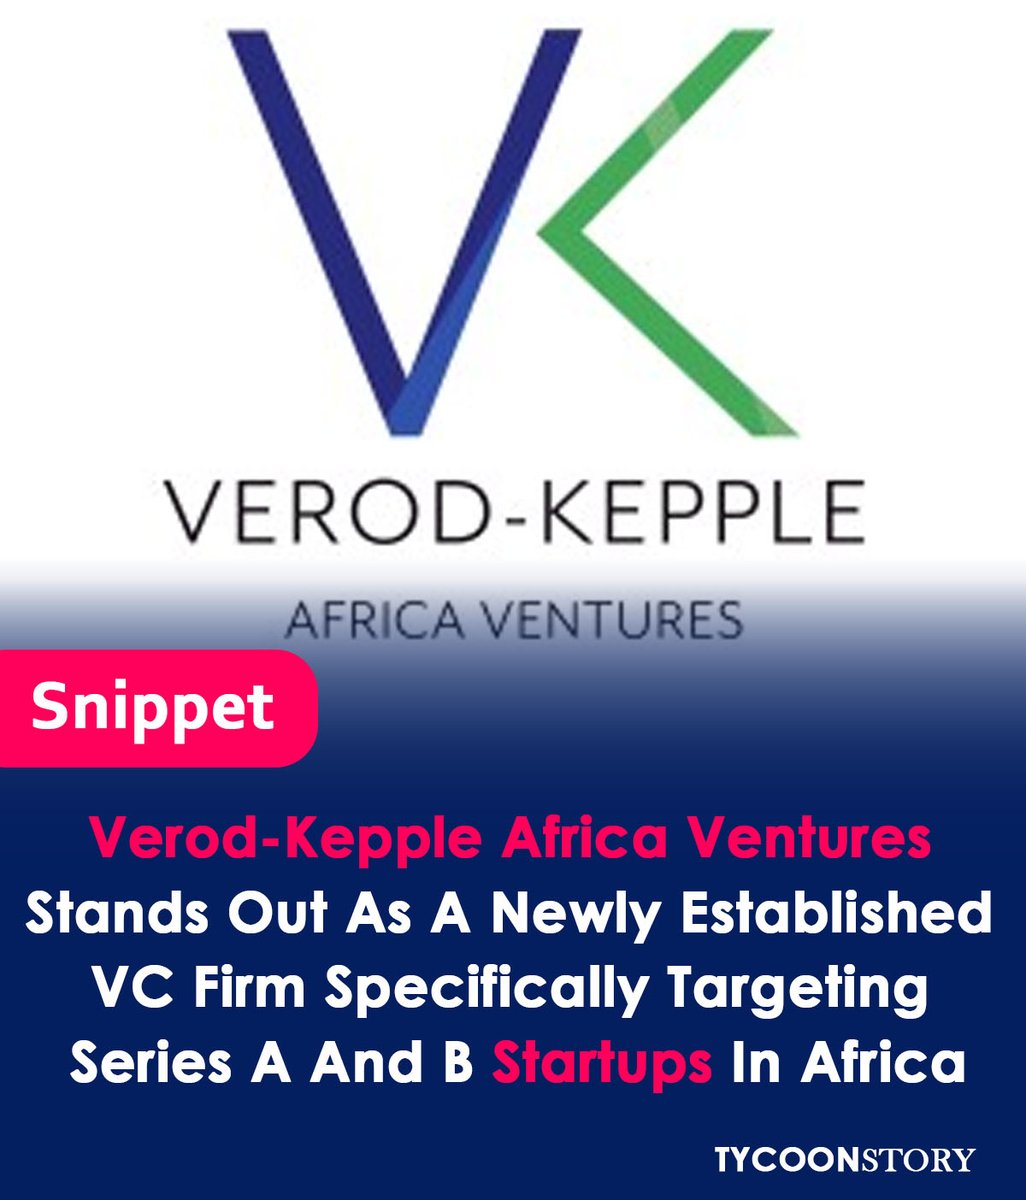 Verod-Kepple Africa Ventures closes $60 million fund to invest in Series A and B startups across Africa #AfricanVC #VentureCapital #Investment #Funding #Startups #AfricaRising #VKAV #VerodKepple #GrowthStage #SeriesA #SeriesB #LocalInvestors #PanAfrican #Fintech @VerodKepple